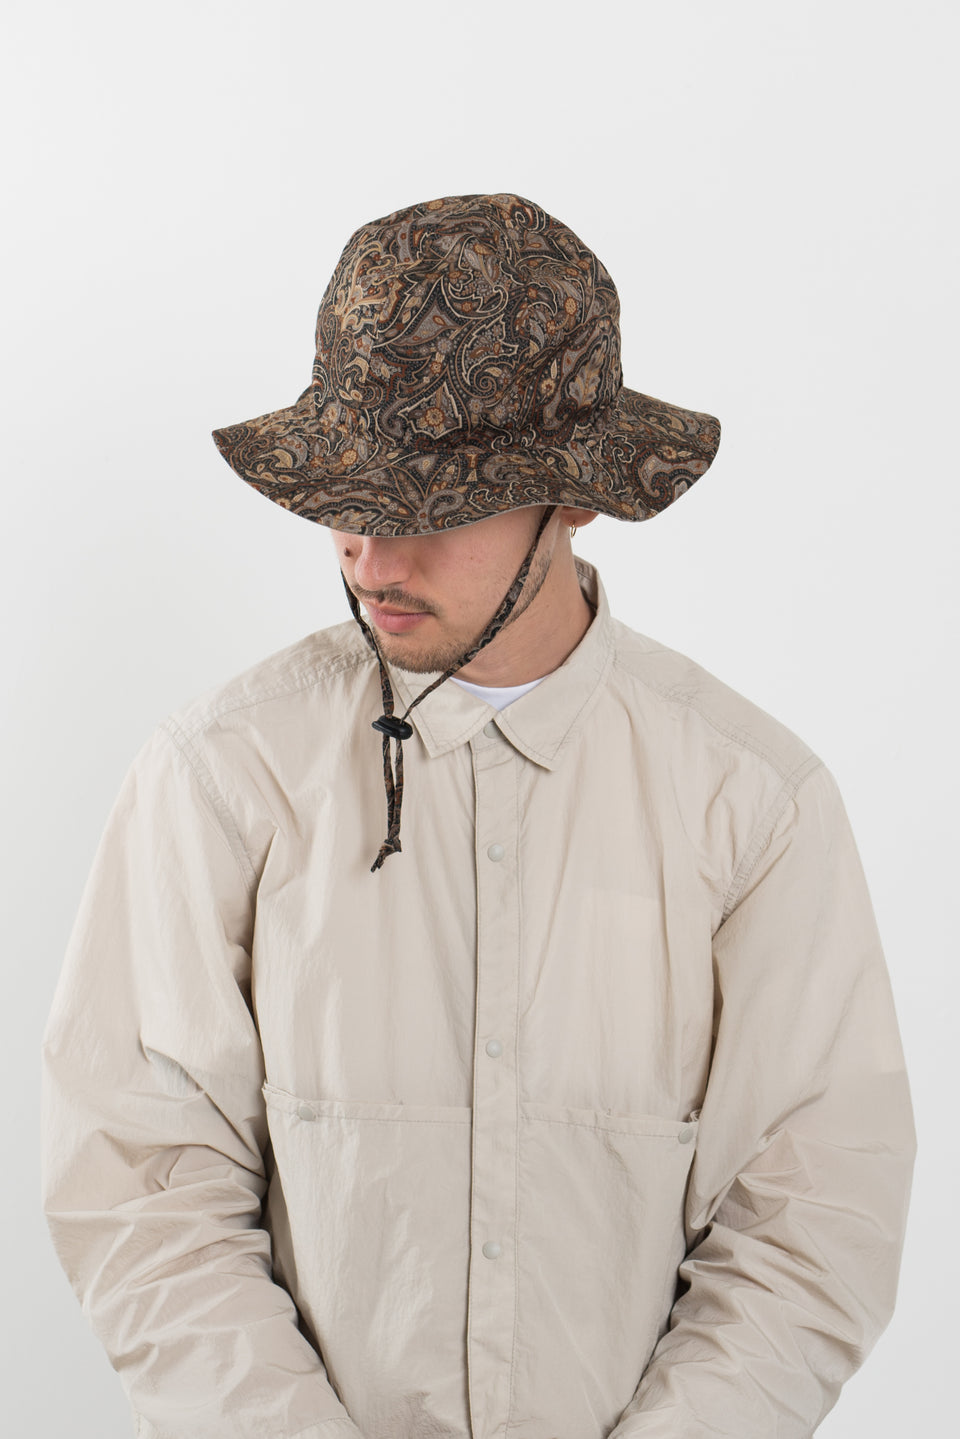 Found Feather SS22 Japan Reversible Military Sun Hat Yoryu Wasabi / Paisley Calculus Victoria BC Canada